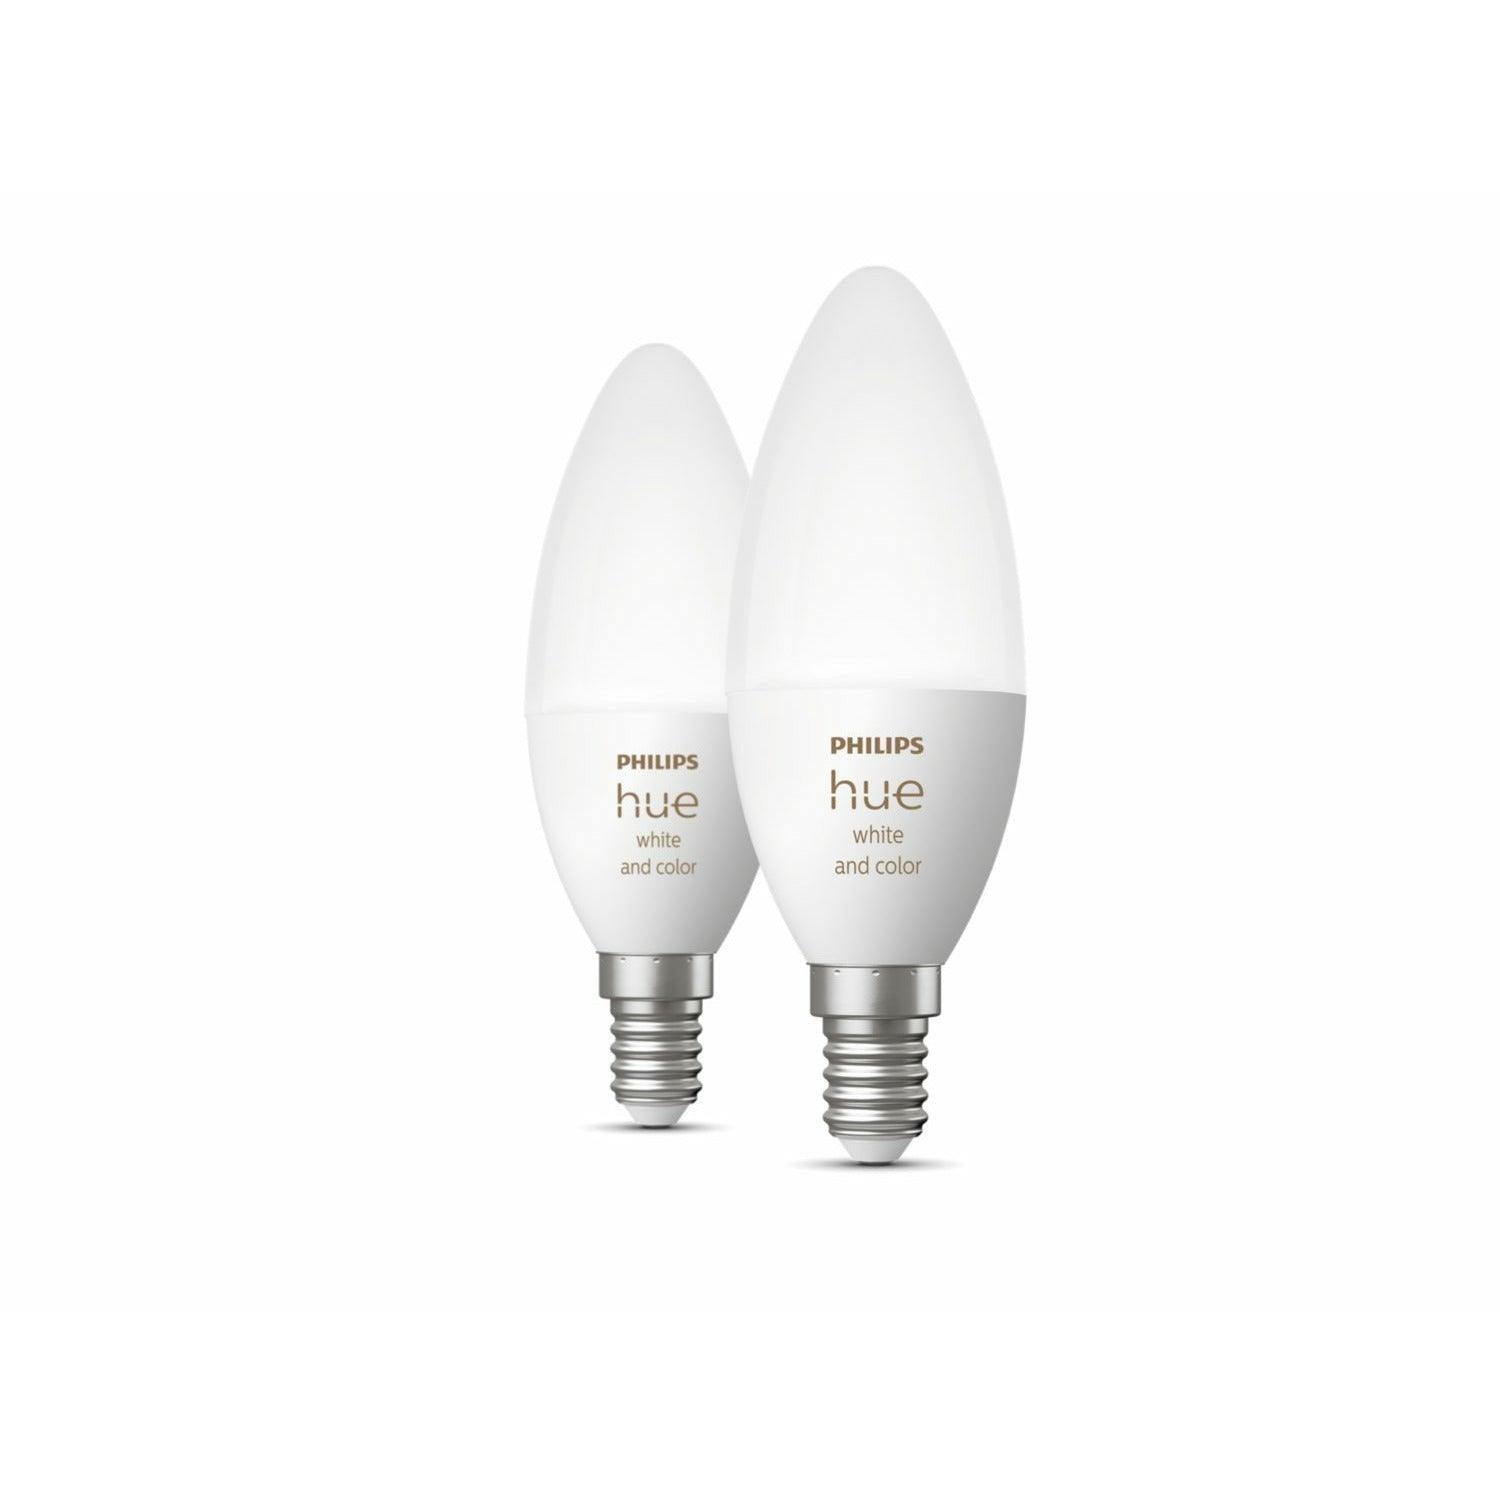 Philips Hue White and Color E14 Smart LED Bulb - Dual Pack| 929002294205 (7489397162172)